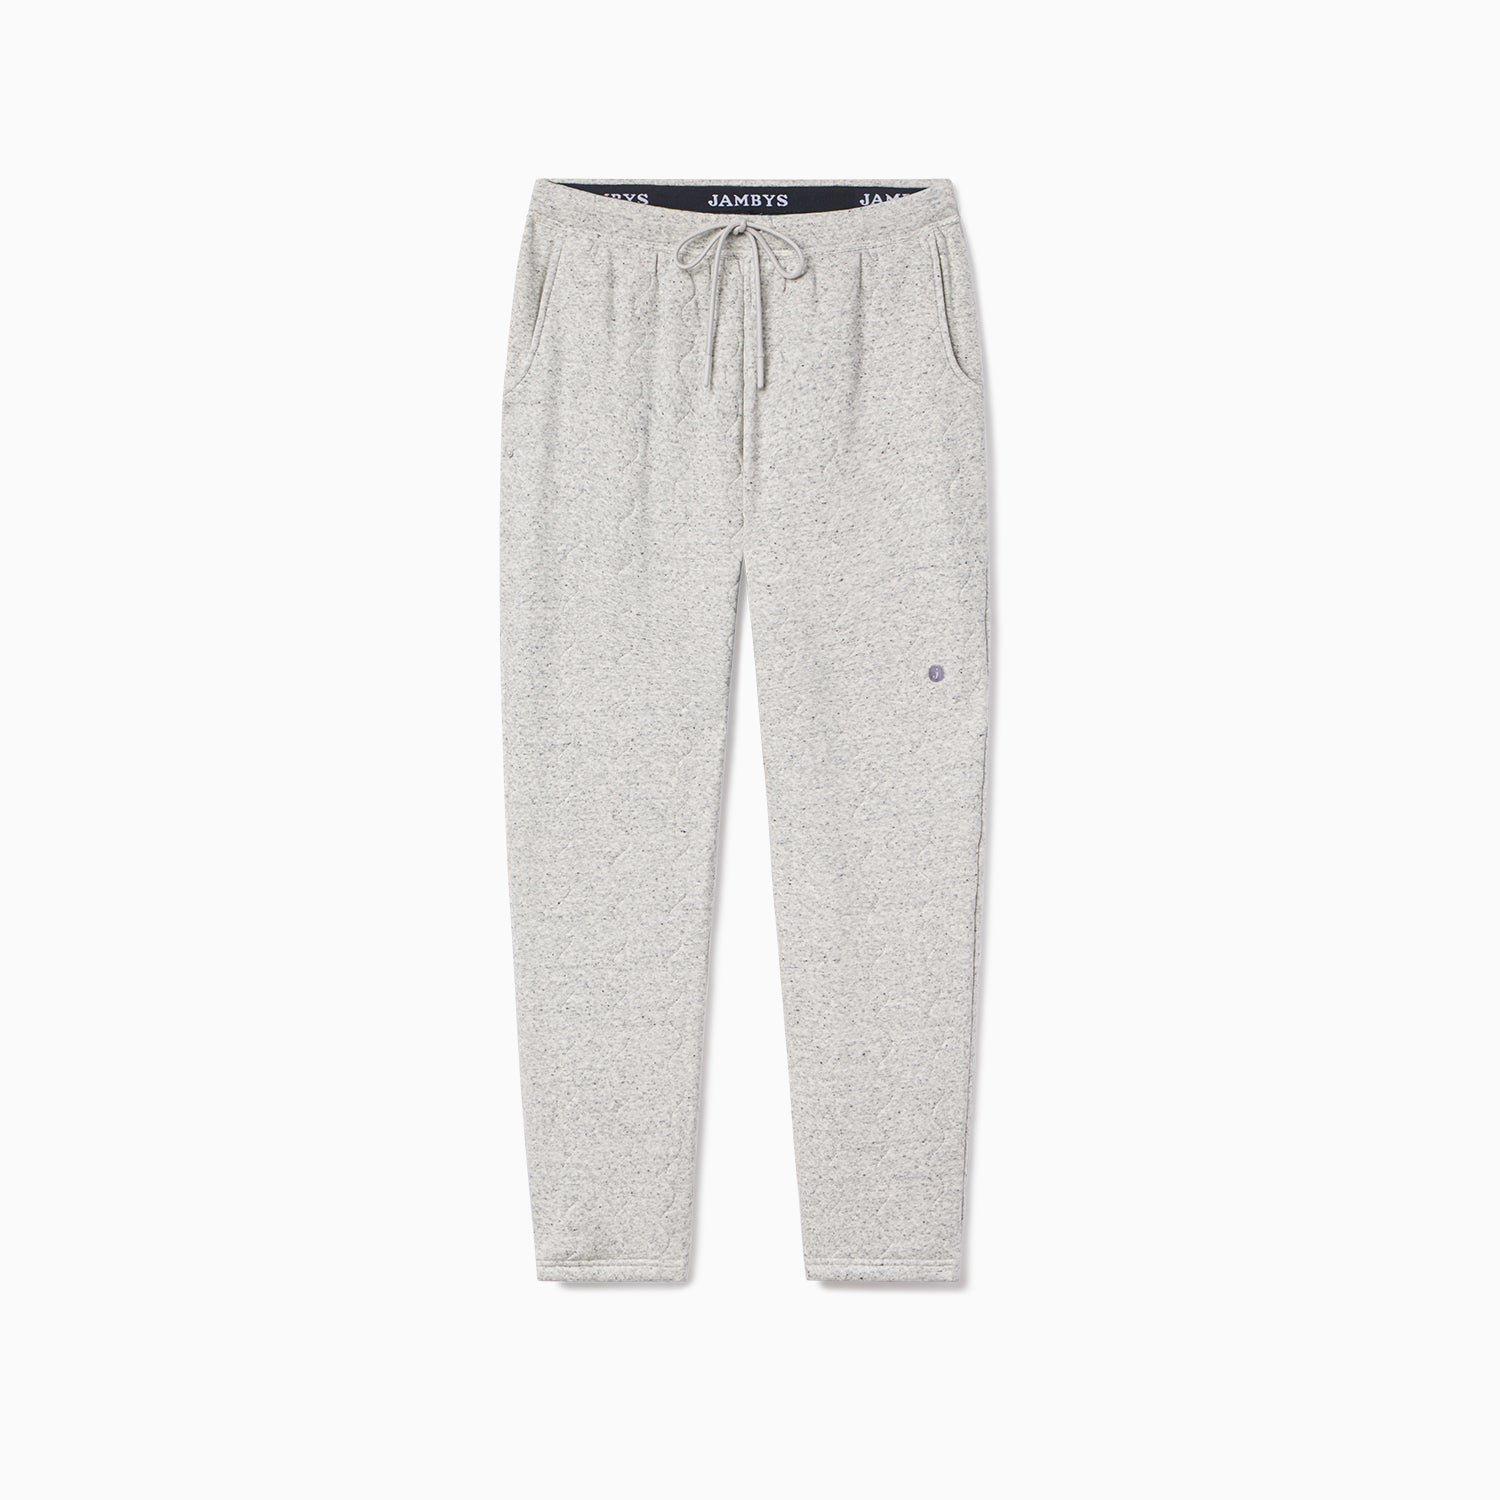 Salt + Pepper Chilluxe Quilted Pant